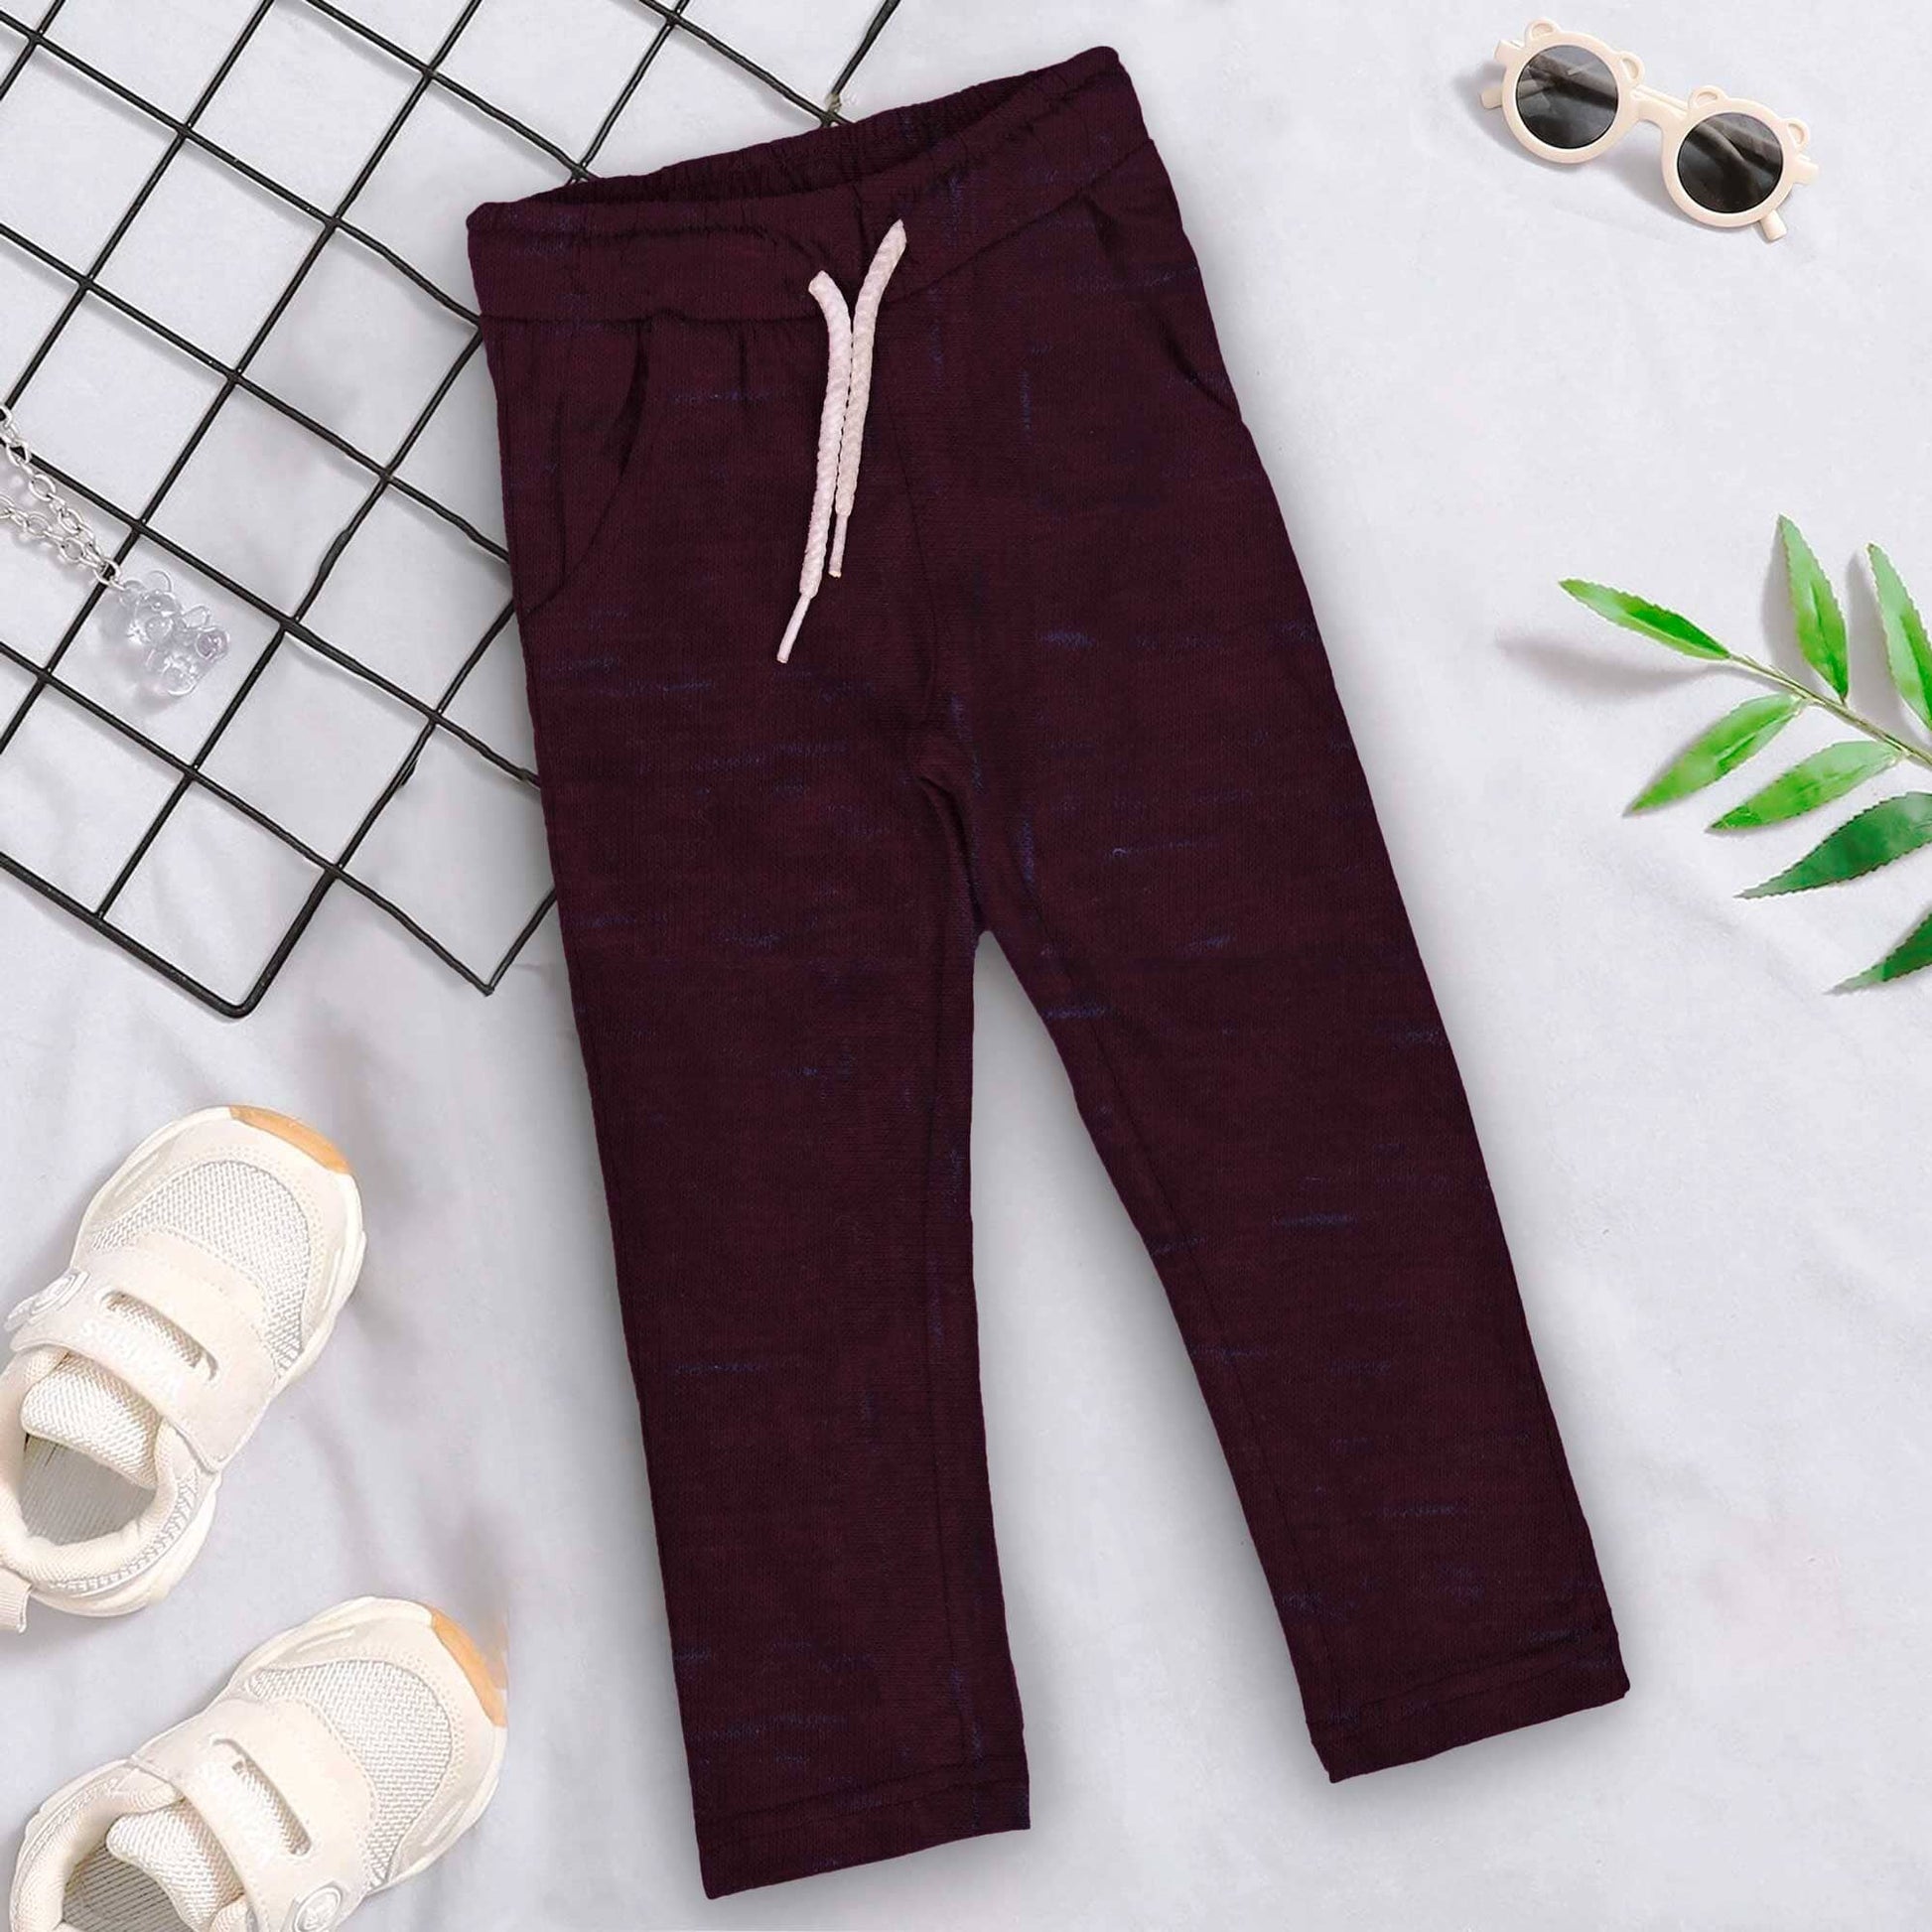 Minoti Kid's Solid Design Trousers Boy's Trousers SZK Plum 1-2 Years 